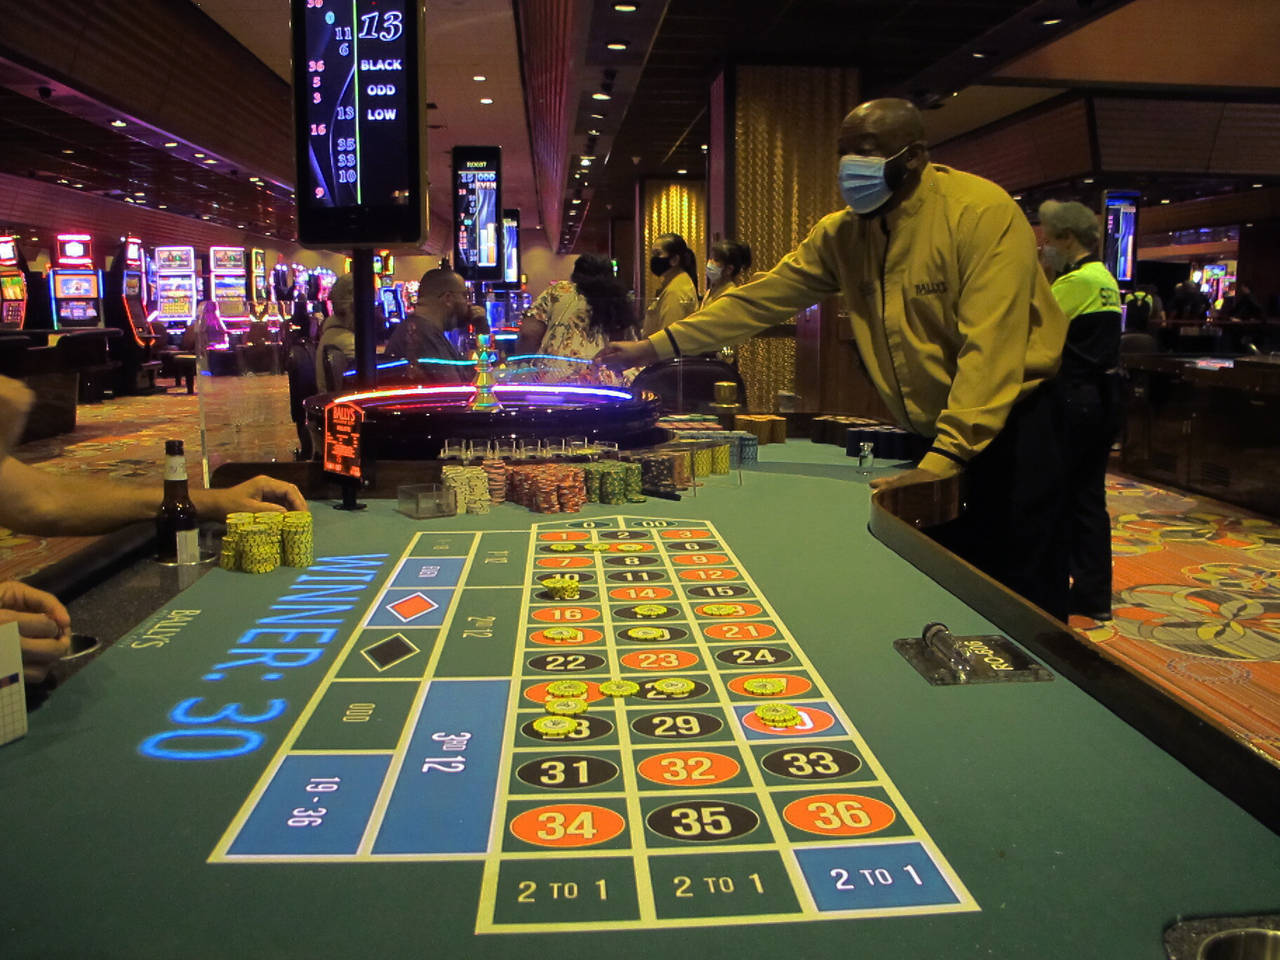 A dealer conducts a game of roulette in Bally's casino in Atlantic City, N.J. on June 23, 2021. On ...